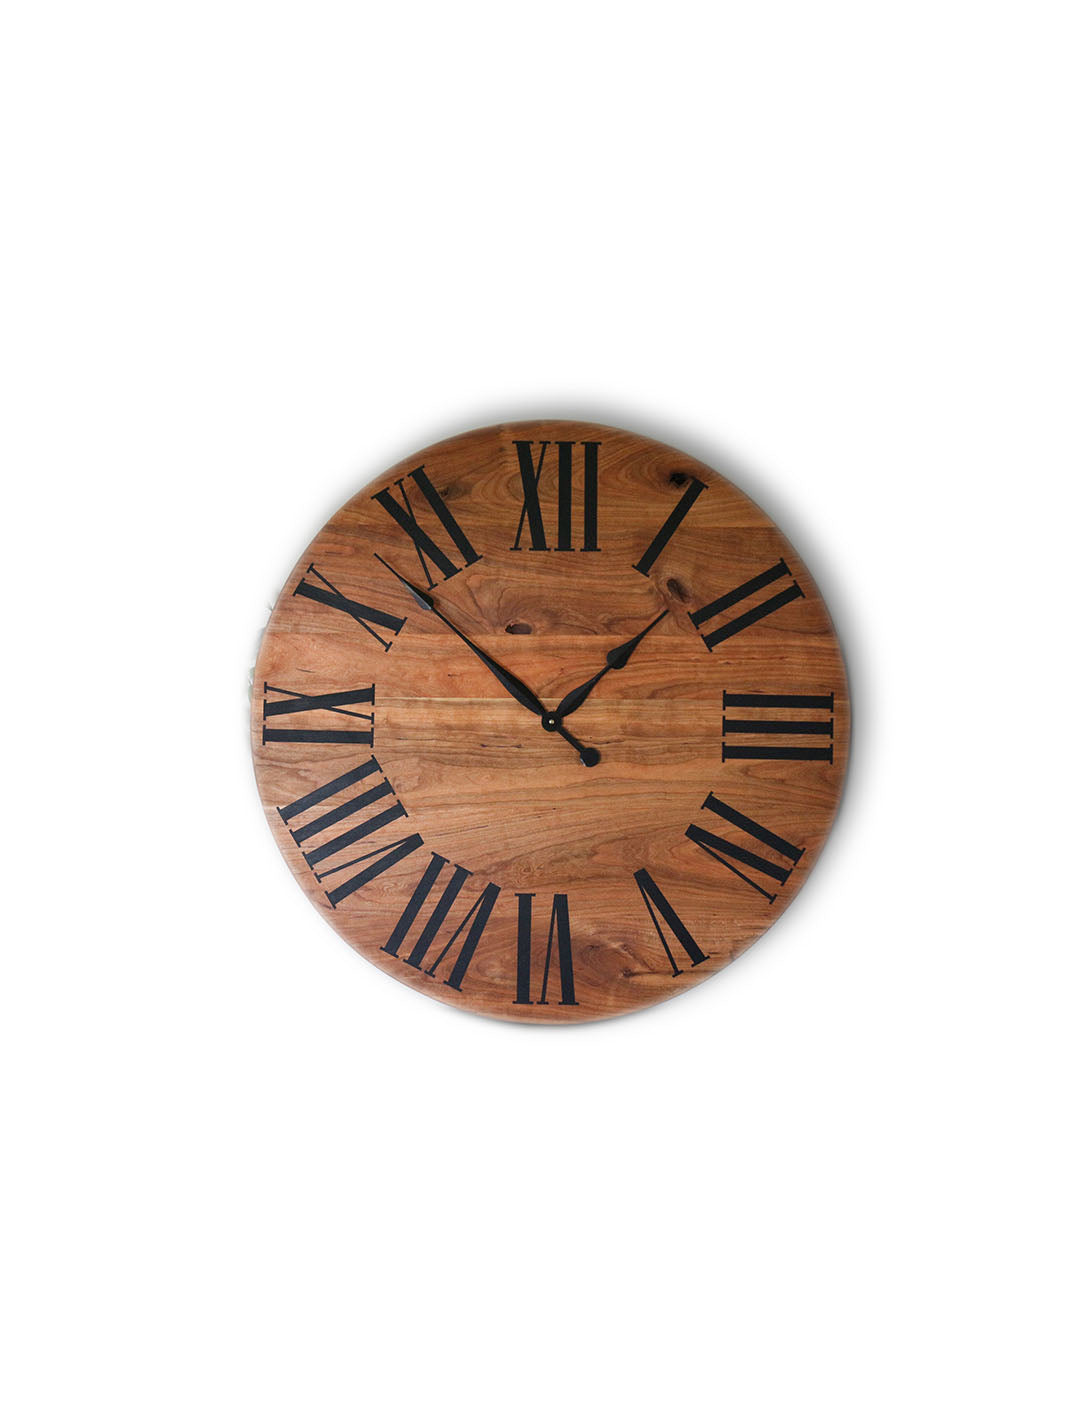 Large Solid Cherry Hardwood Wall Clock with Black Roman Numerals Earthly Comfort Clocks 552